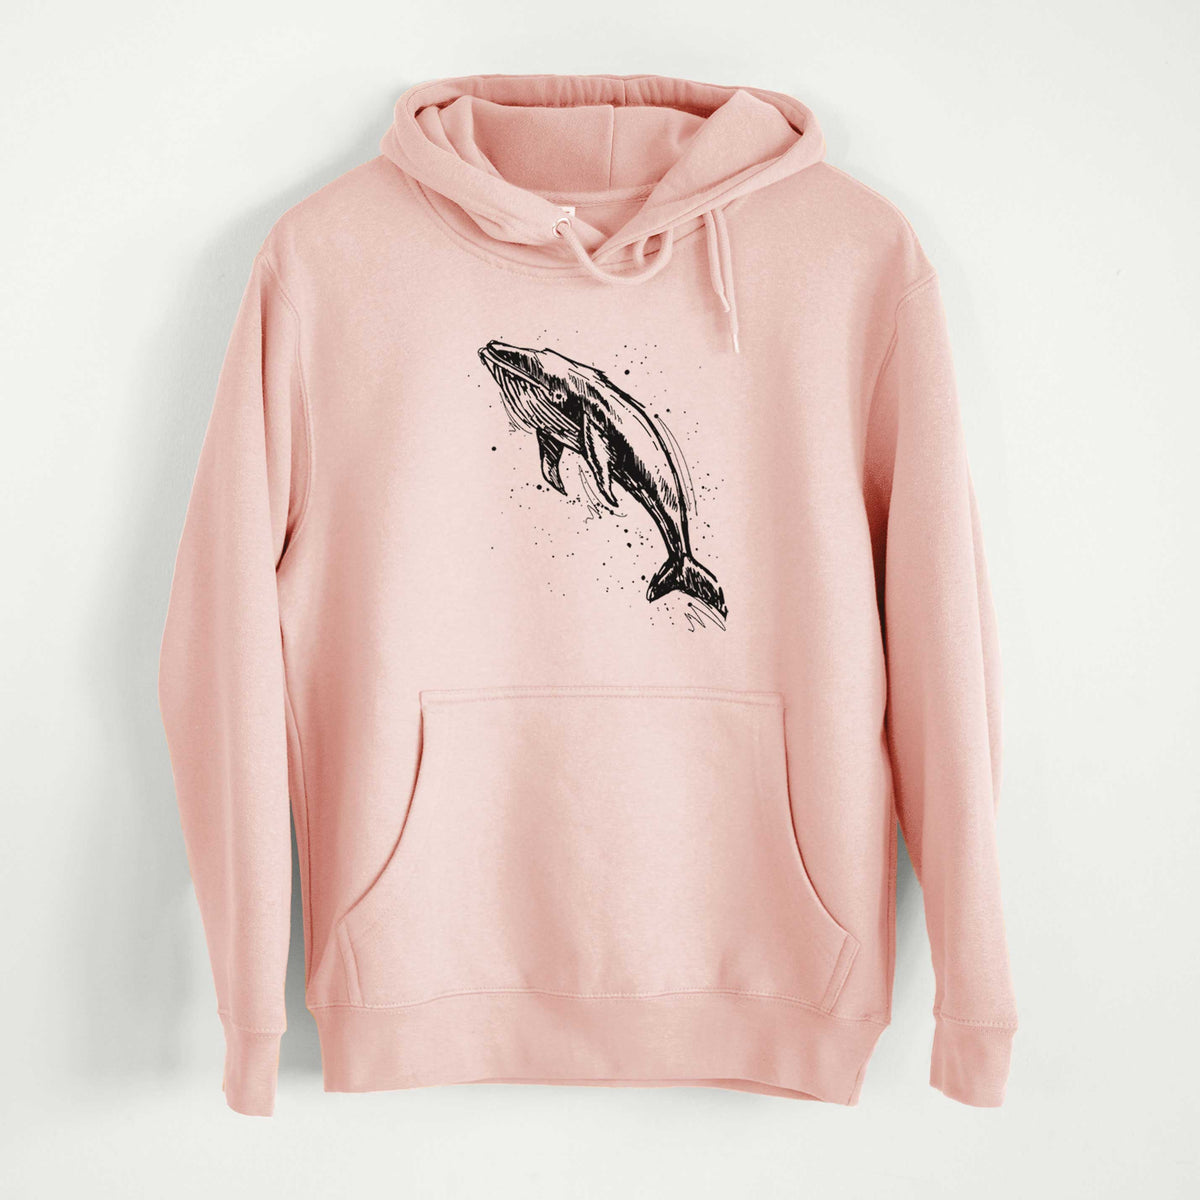 Humpback Whale  - Mid-Weight Unisex Premium Blend Hoodie